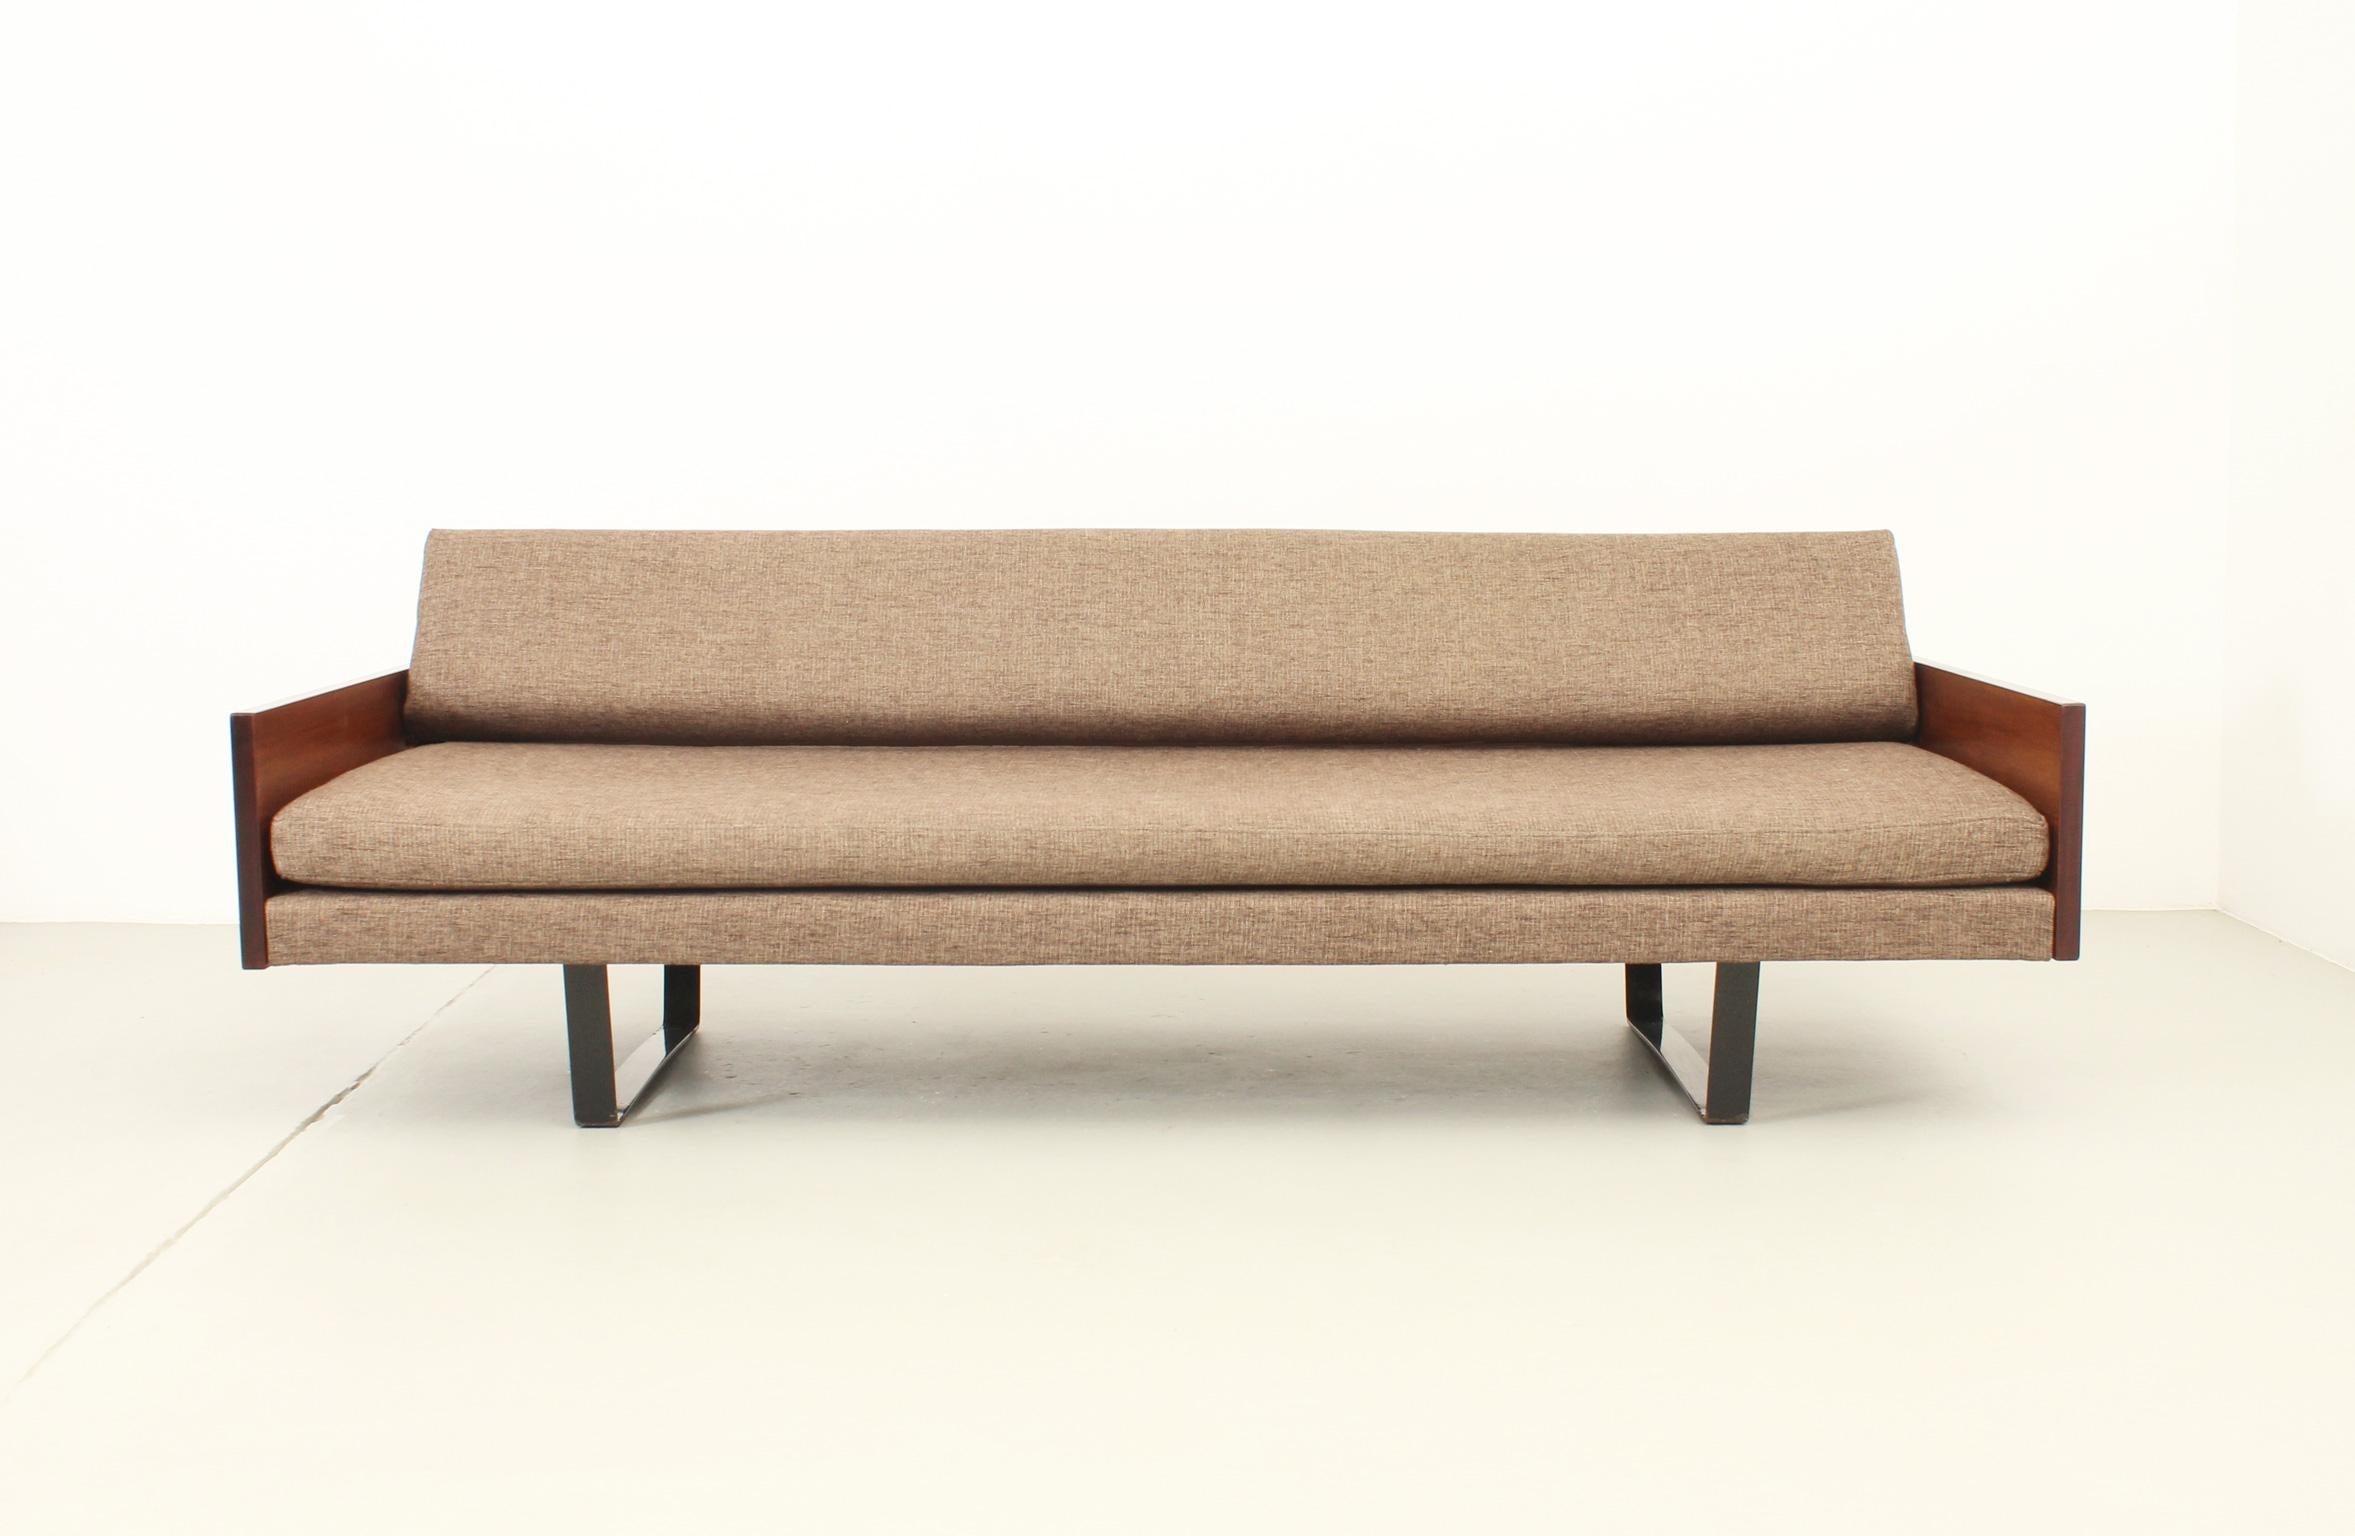 Sofa bed designed by Robin Day in 1957 for Hille, UK. Iconic British design with adjustable back-rest that can be easily transformed into a single bed. Teak arms and black metal bases, fully restored with new fabric and webbing. 